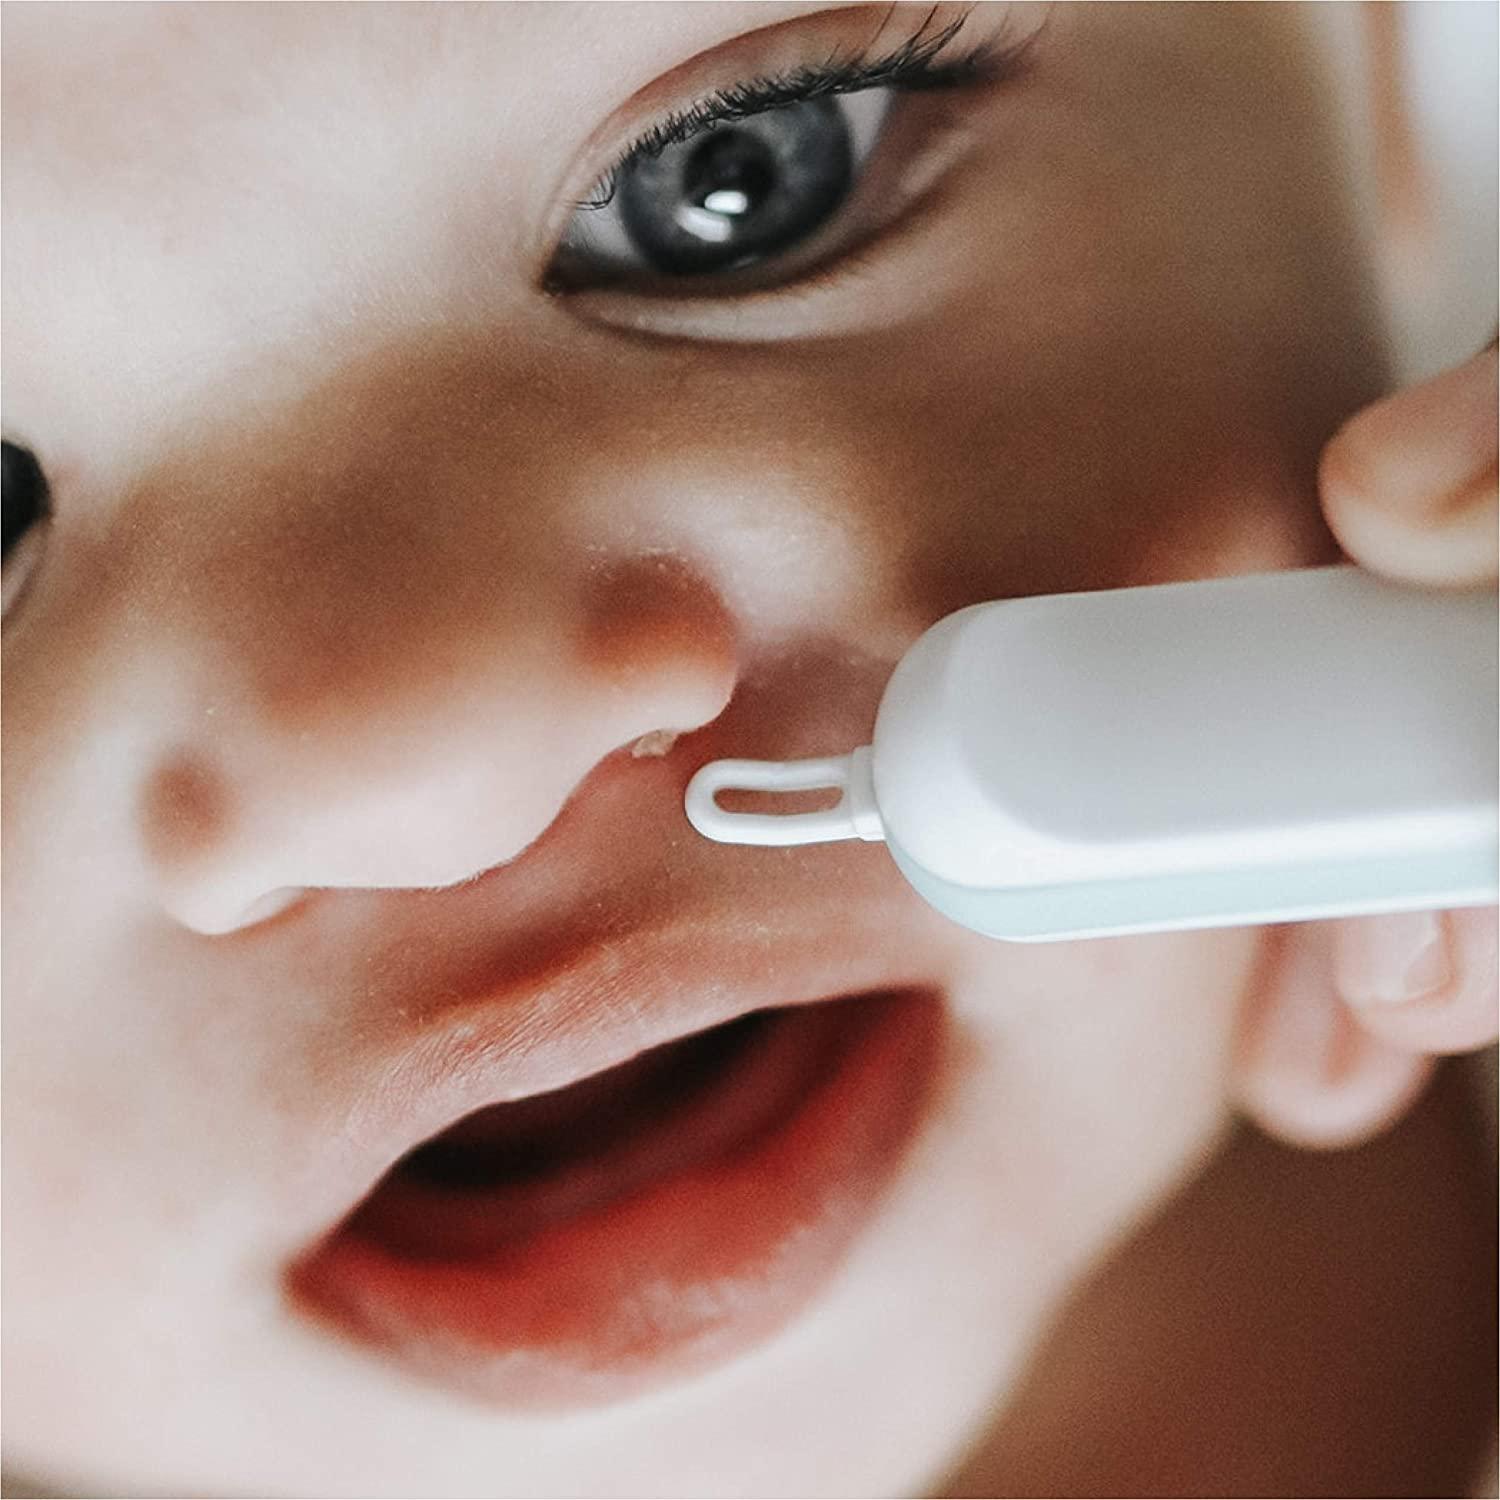 The fridababy 3-in-1 nose, nail & ear picker is always a fan